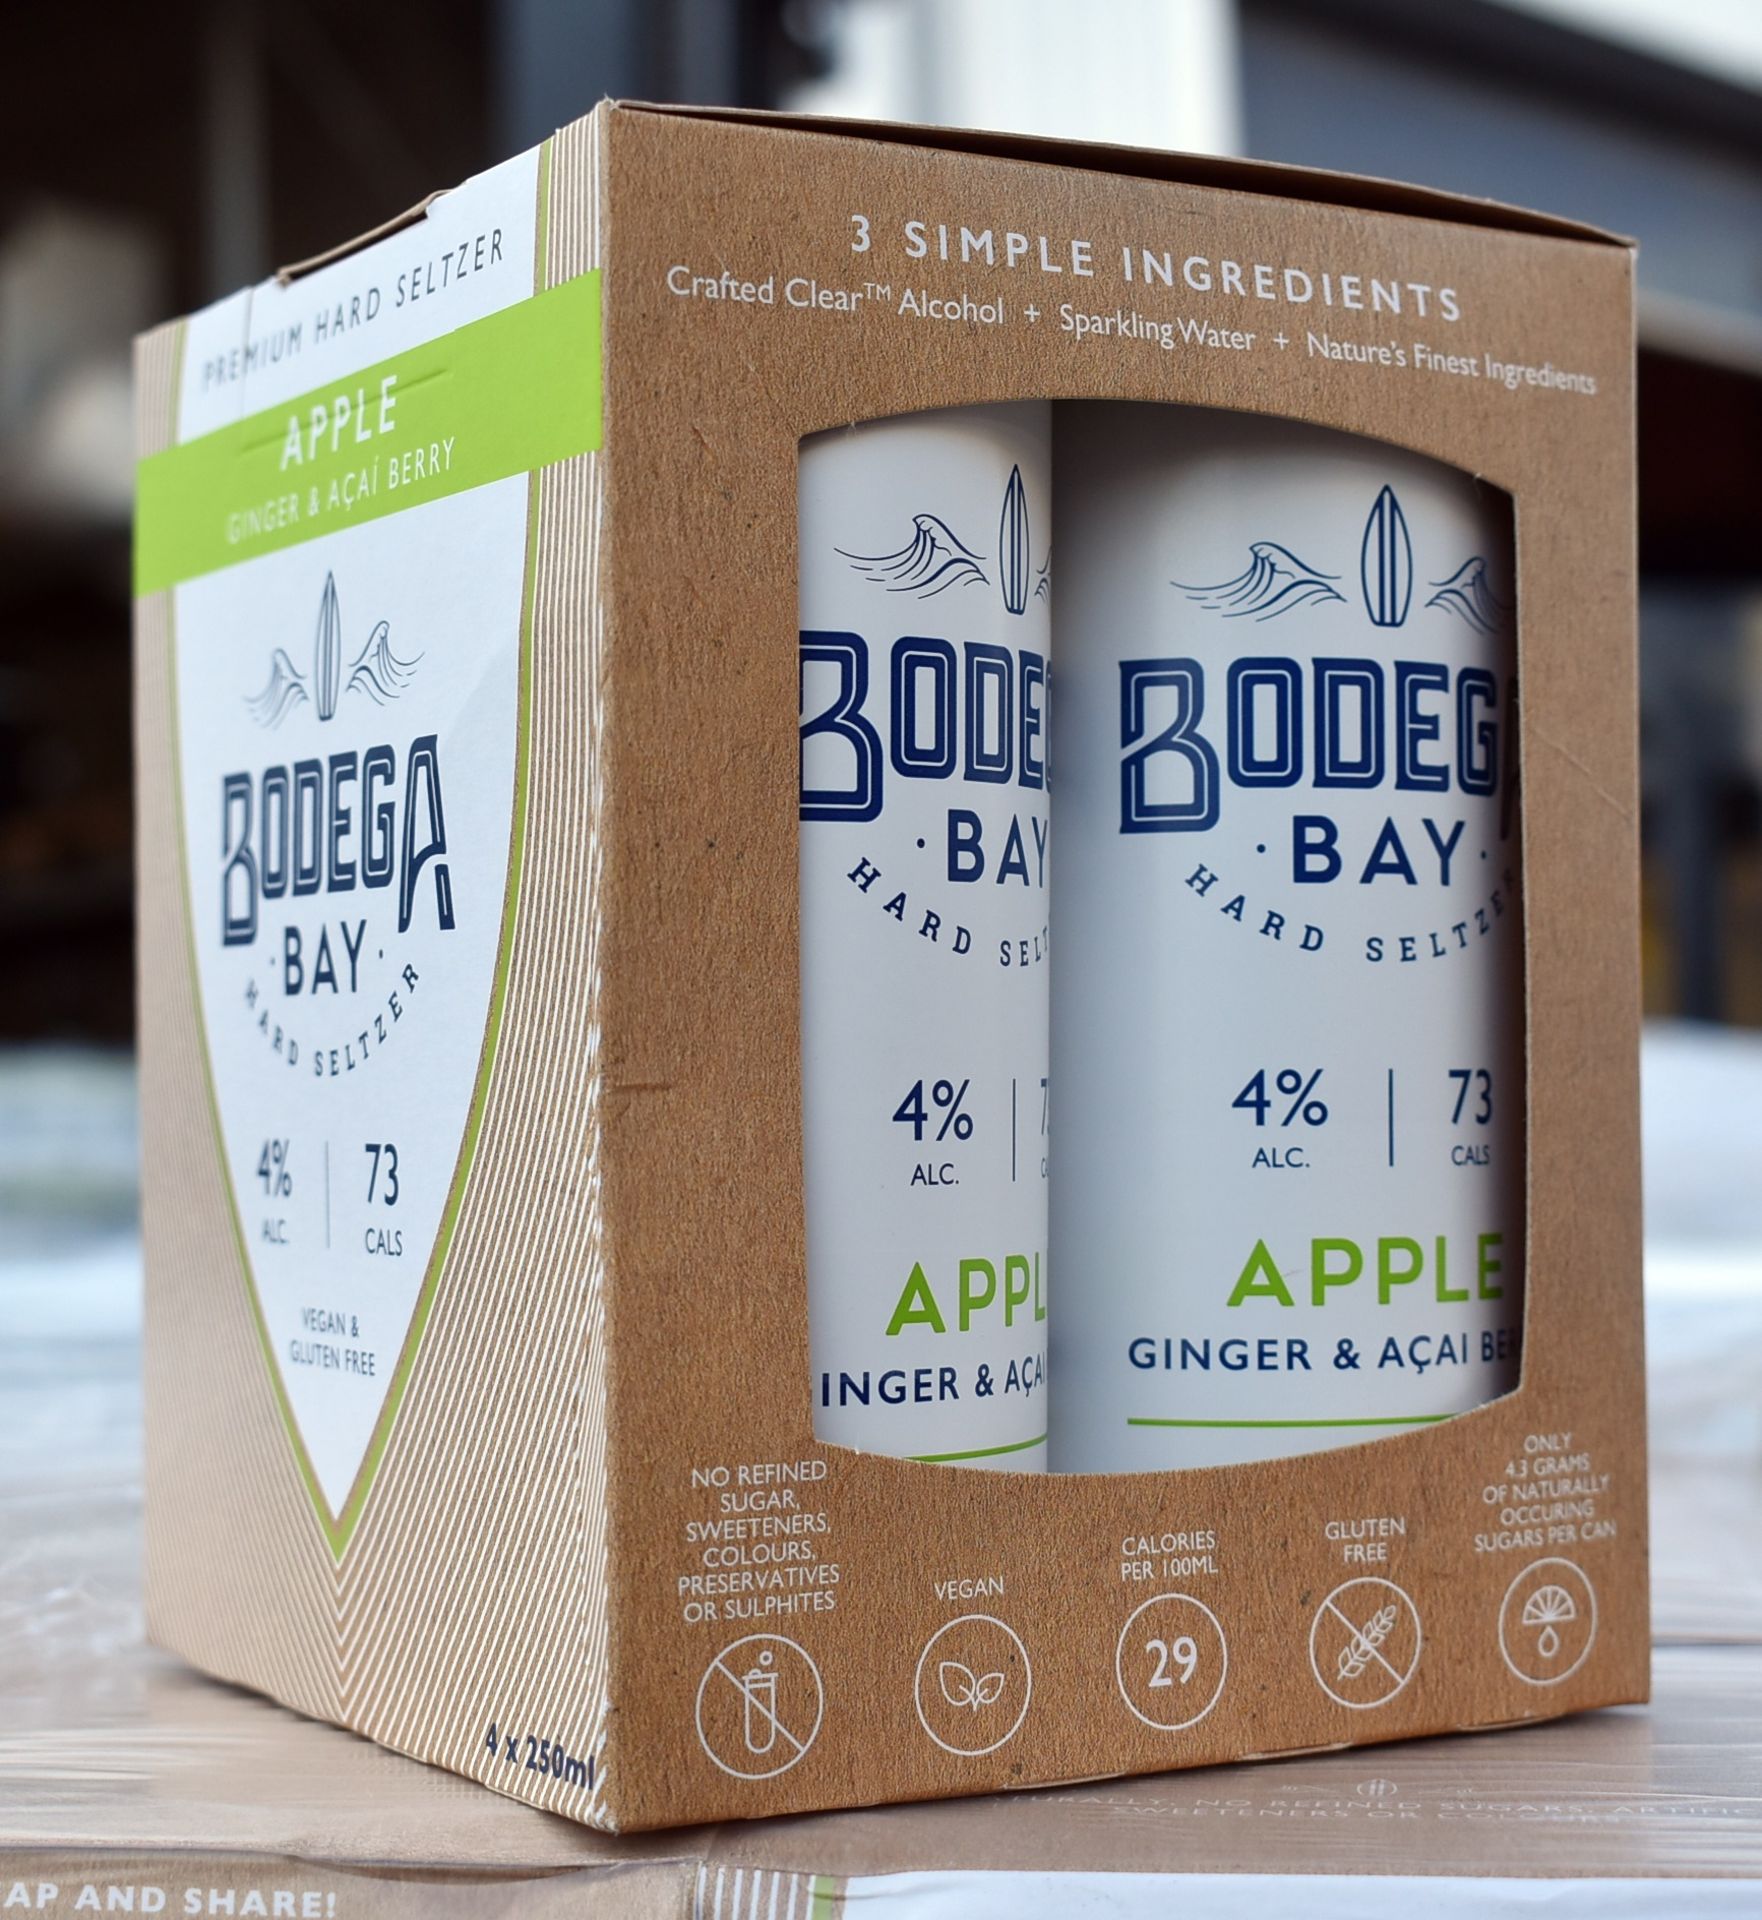 360 x Cans of Bodega Bay Hard Seltzer 250ml Alcoholic Sparkling Water Drinks - Various Flavours - Image 7 of 20